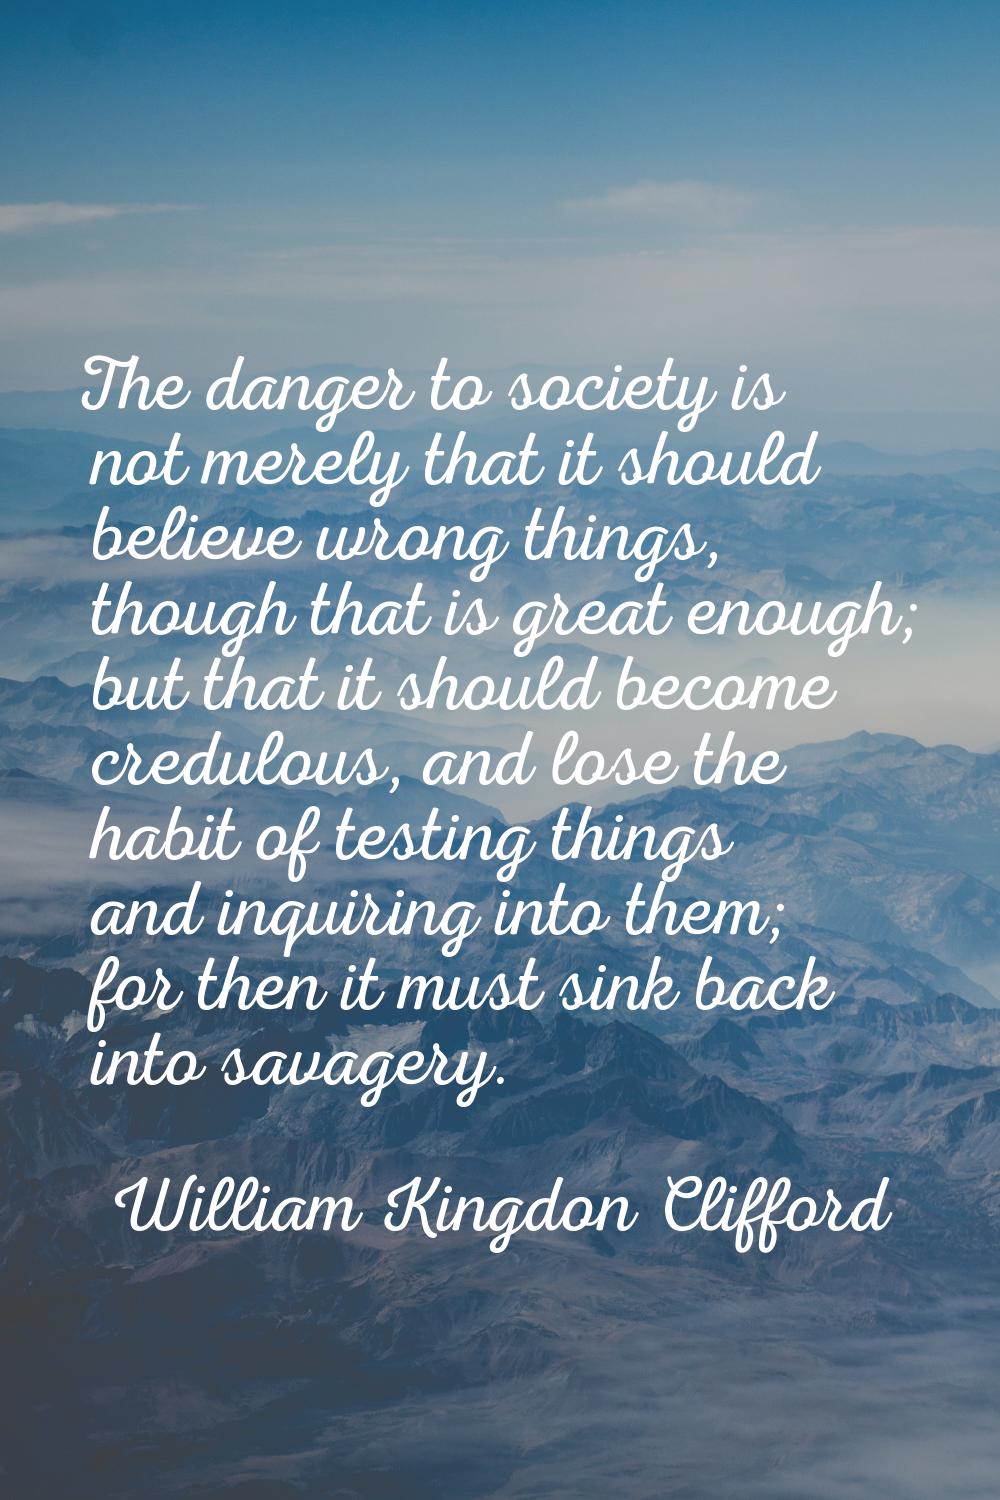 The danger to society is not merely that it should believe wrong things, though that is great enoug